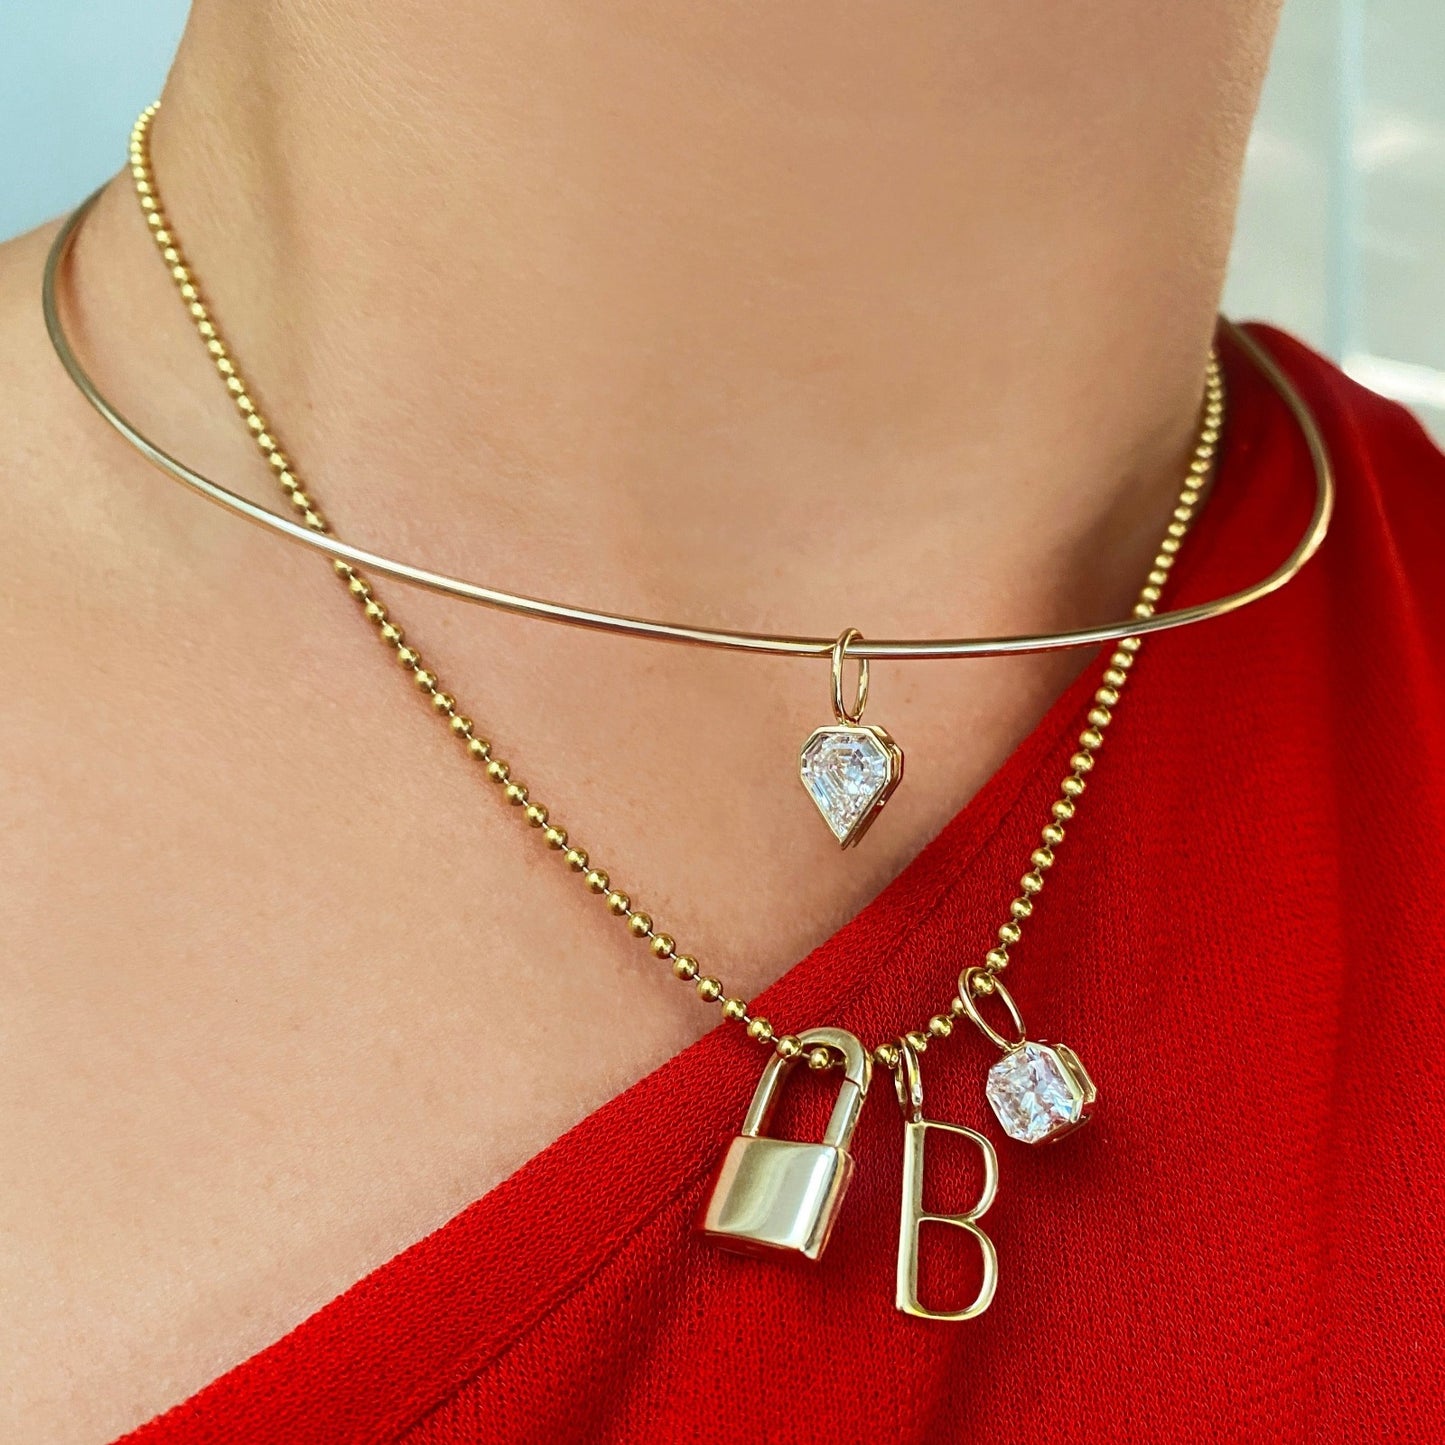 14k gold Shield Diamond Solitaire Charm. Styled on a neck hanging from a wire choker necklace. 